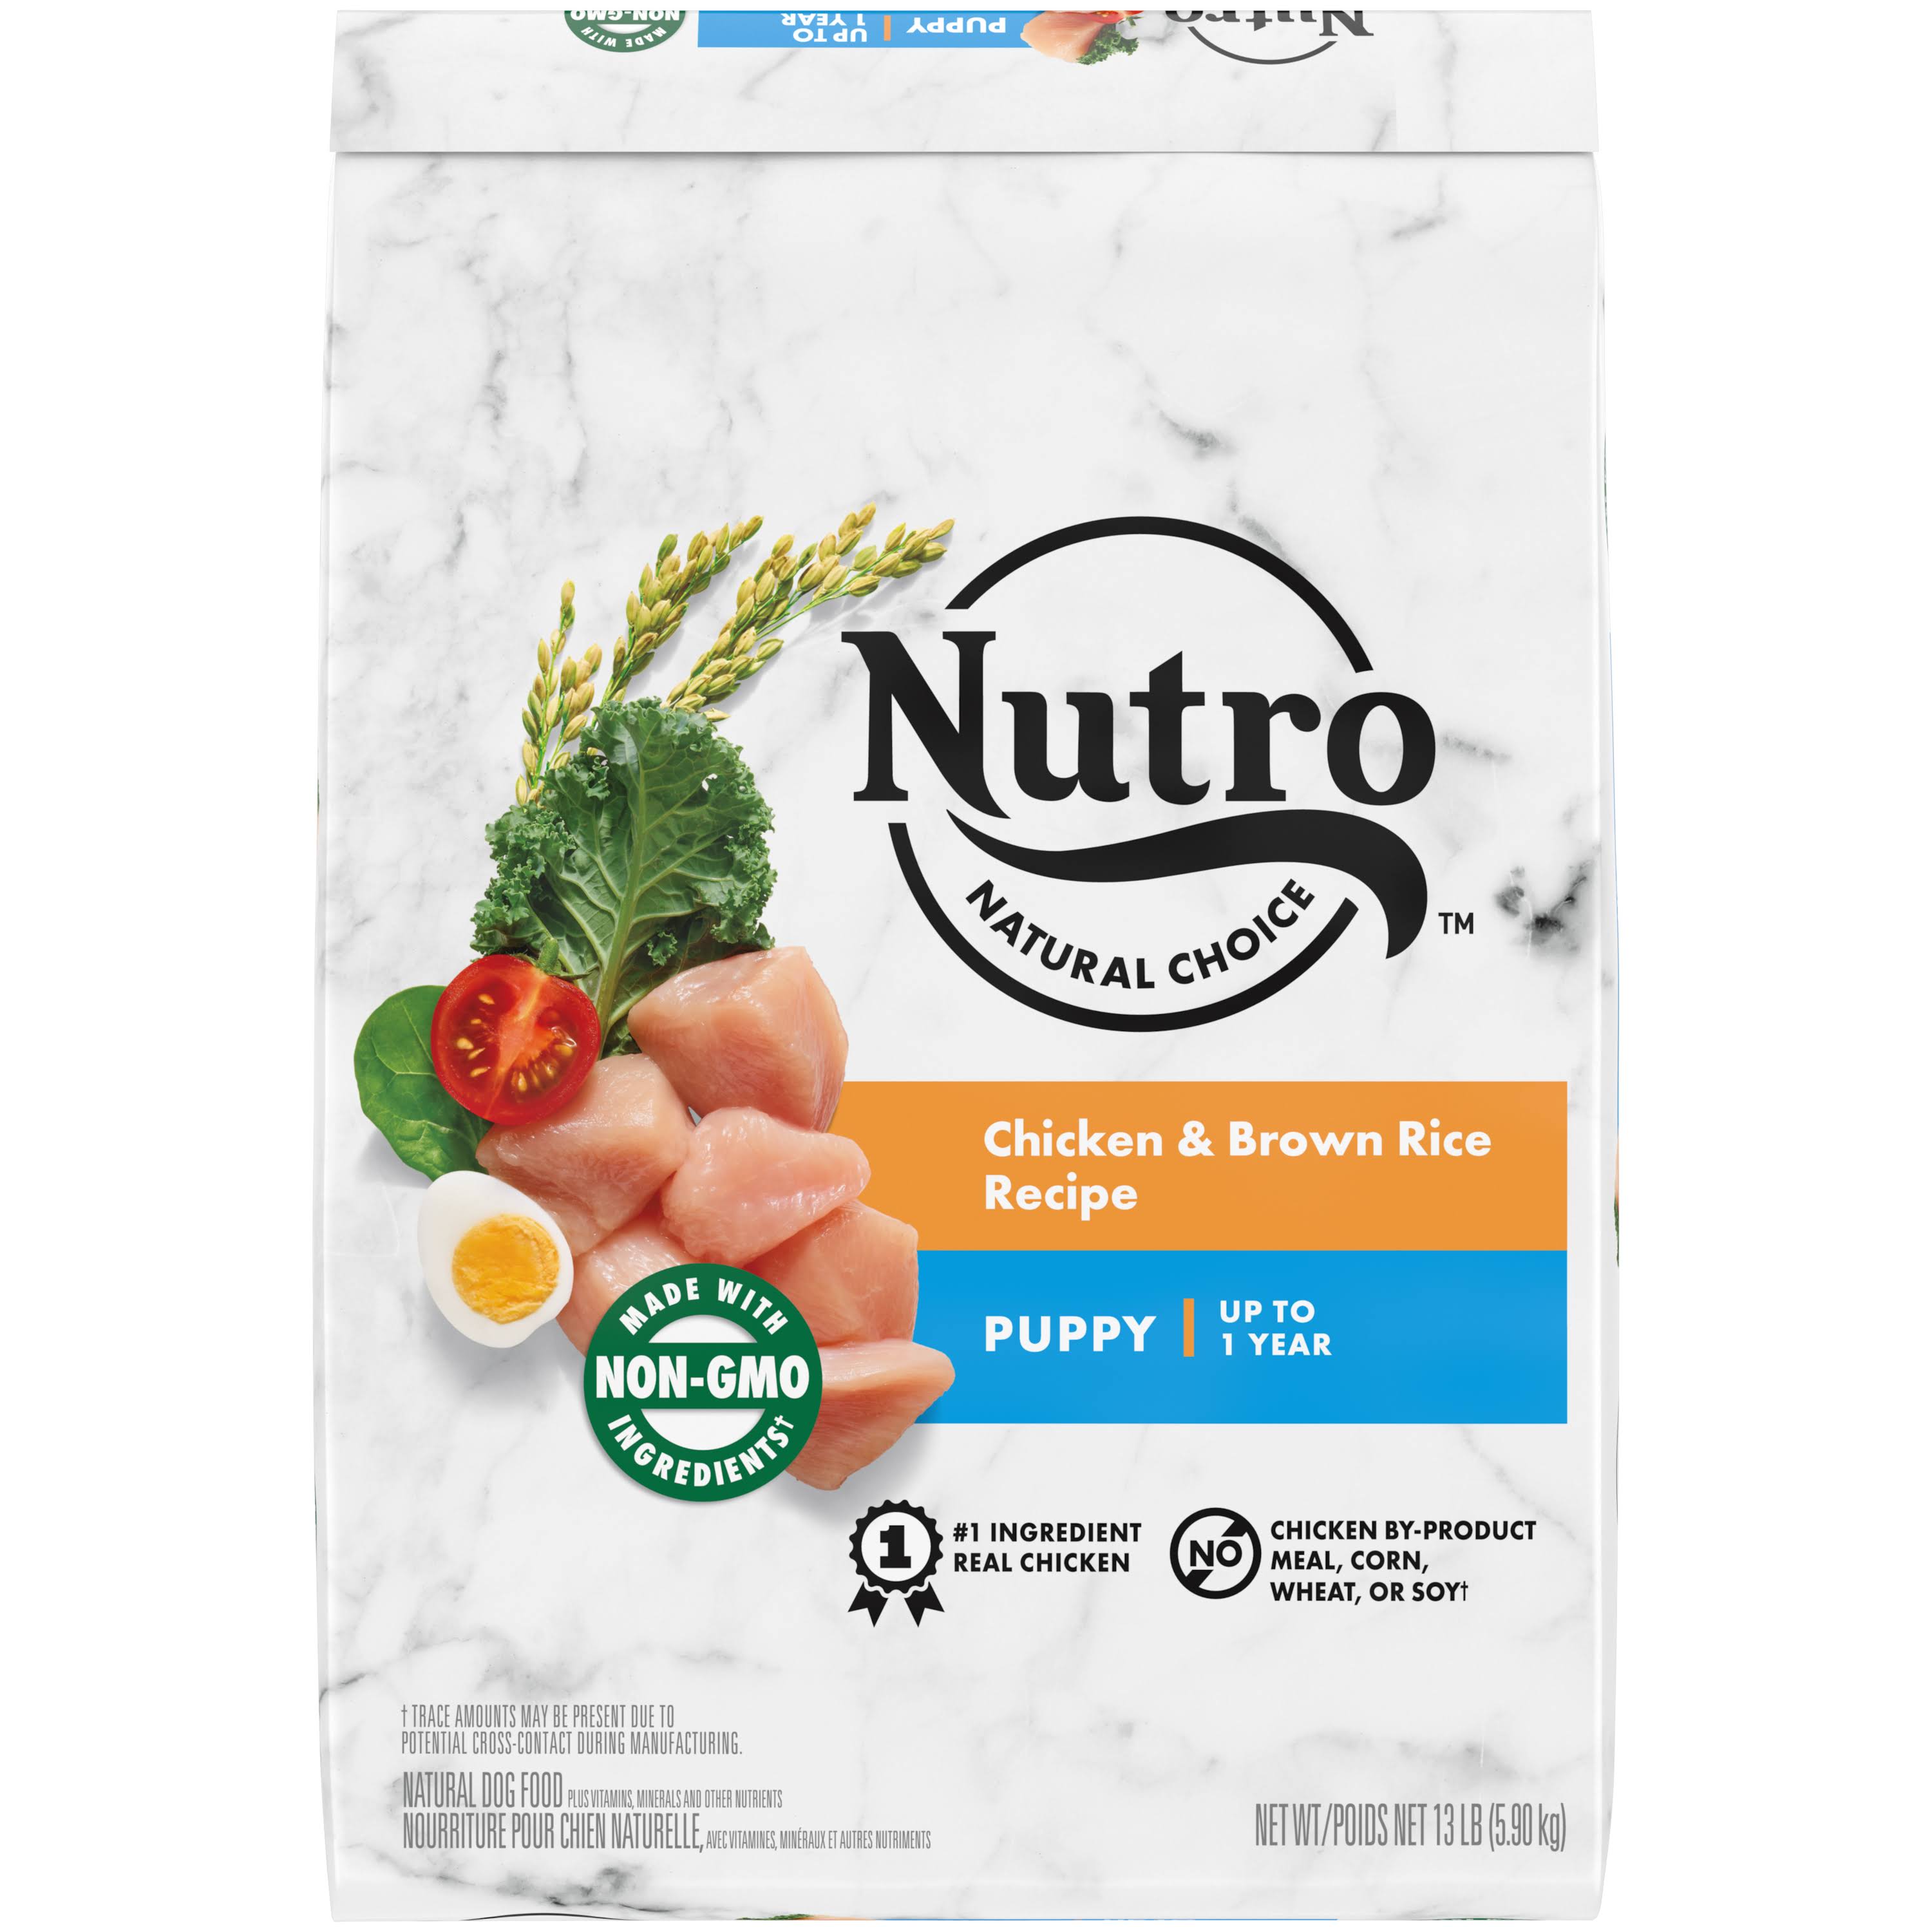 Nutro Natural Choice Puppy Dry Dog Food, Chicken & Brown Rice Recipe Dog Kibble, 13 LB Bag